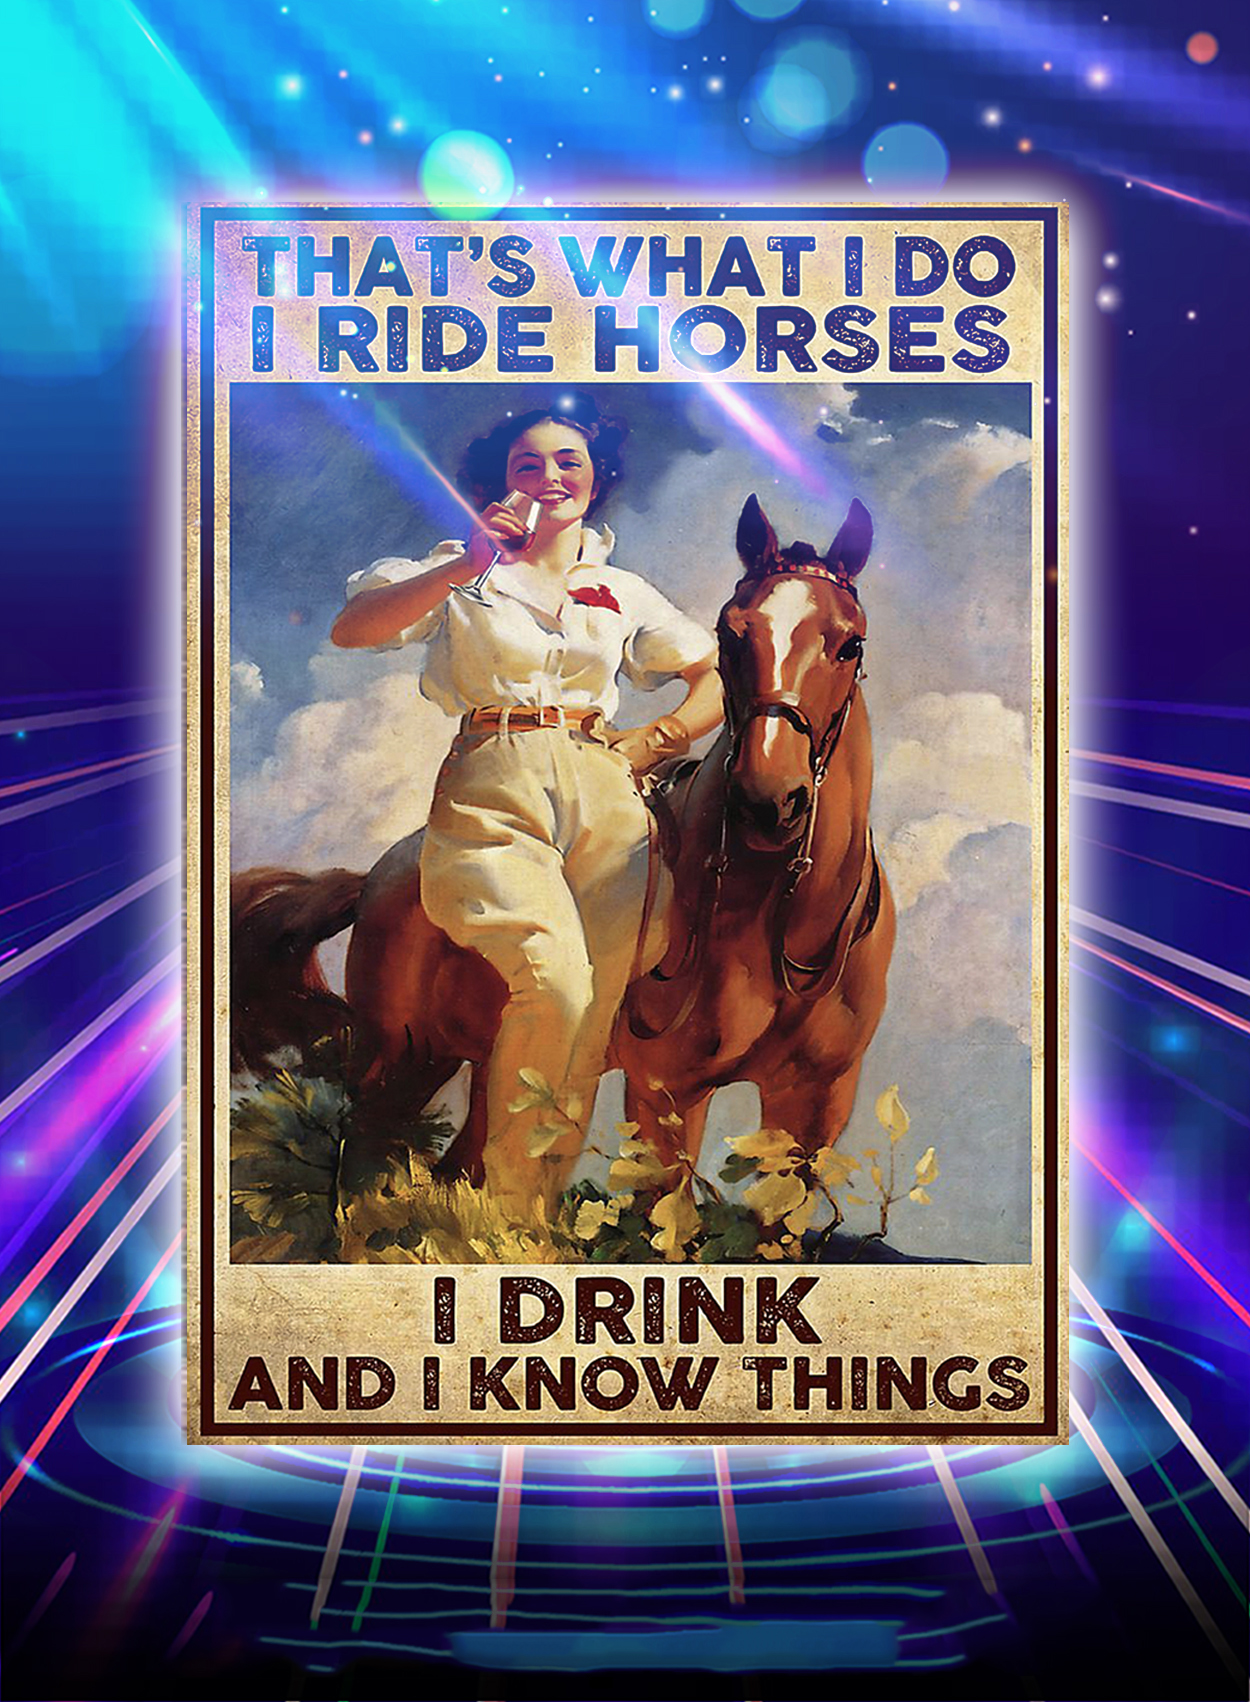 Girl that's what i do i ride horses i drink and i know things poster - A3